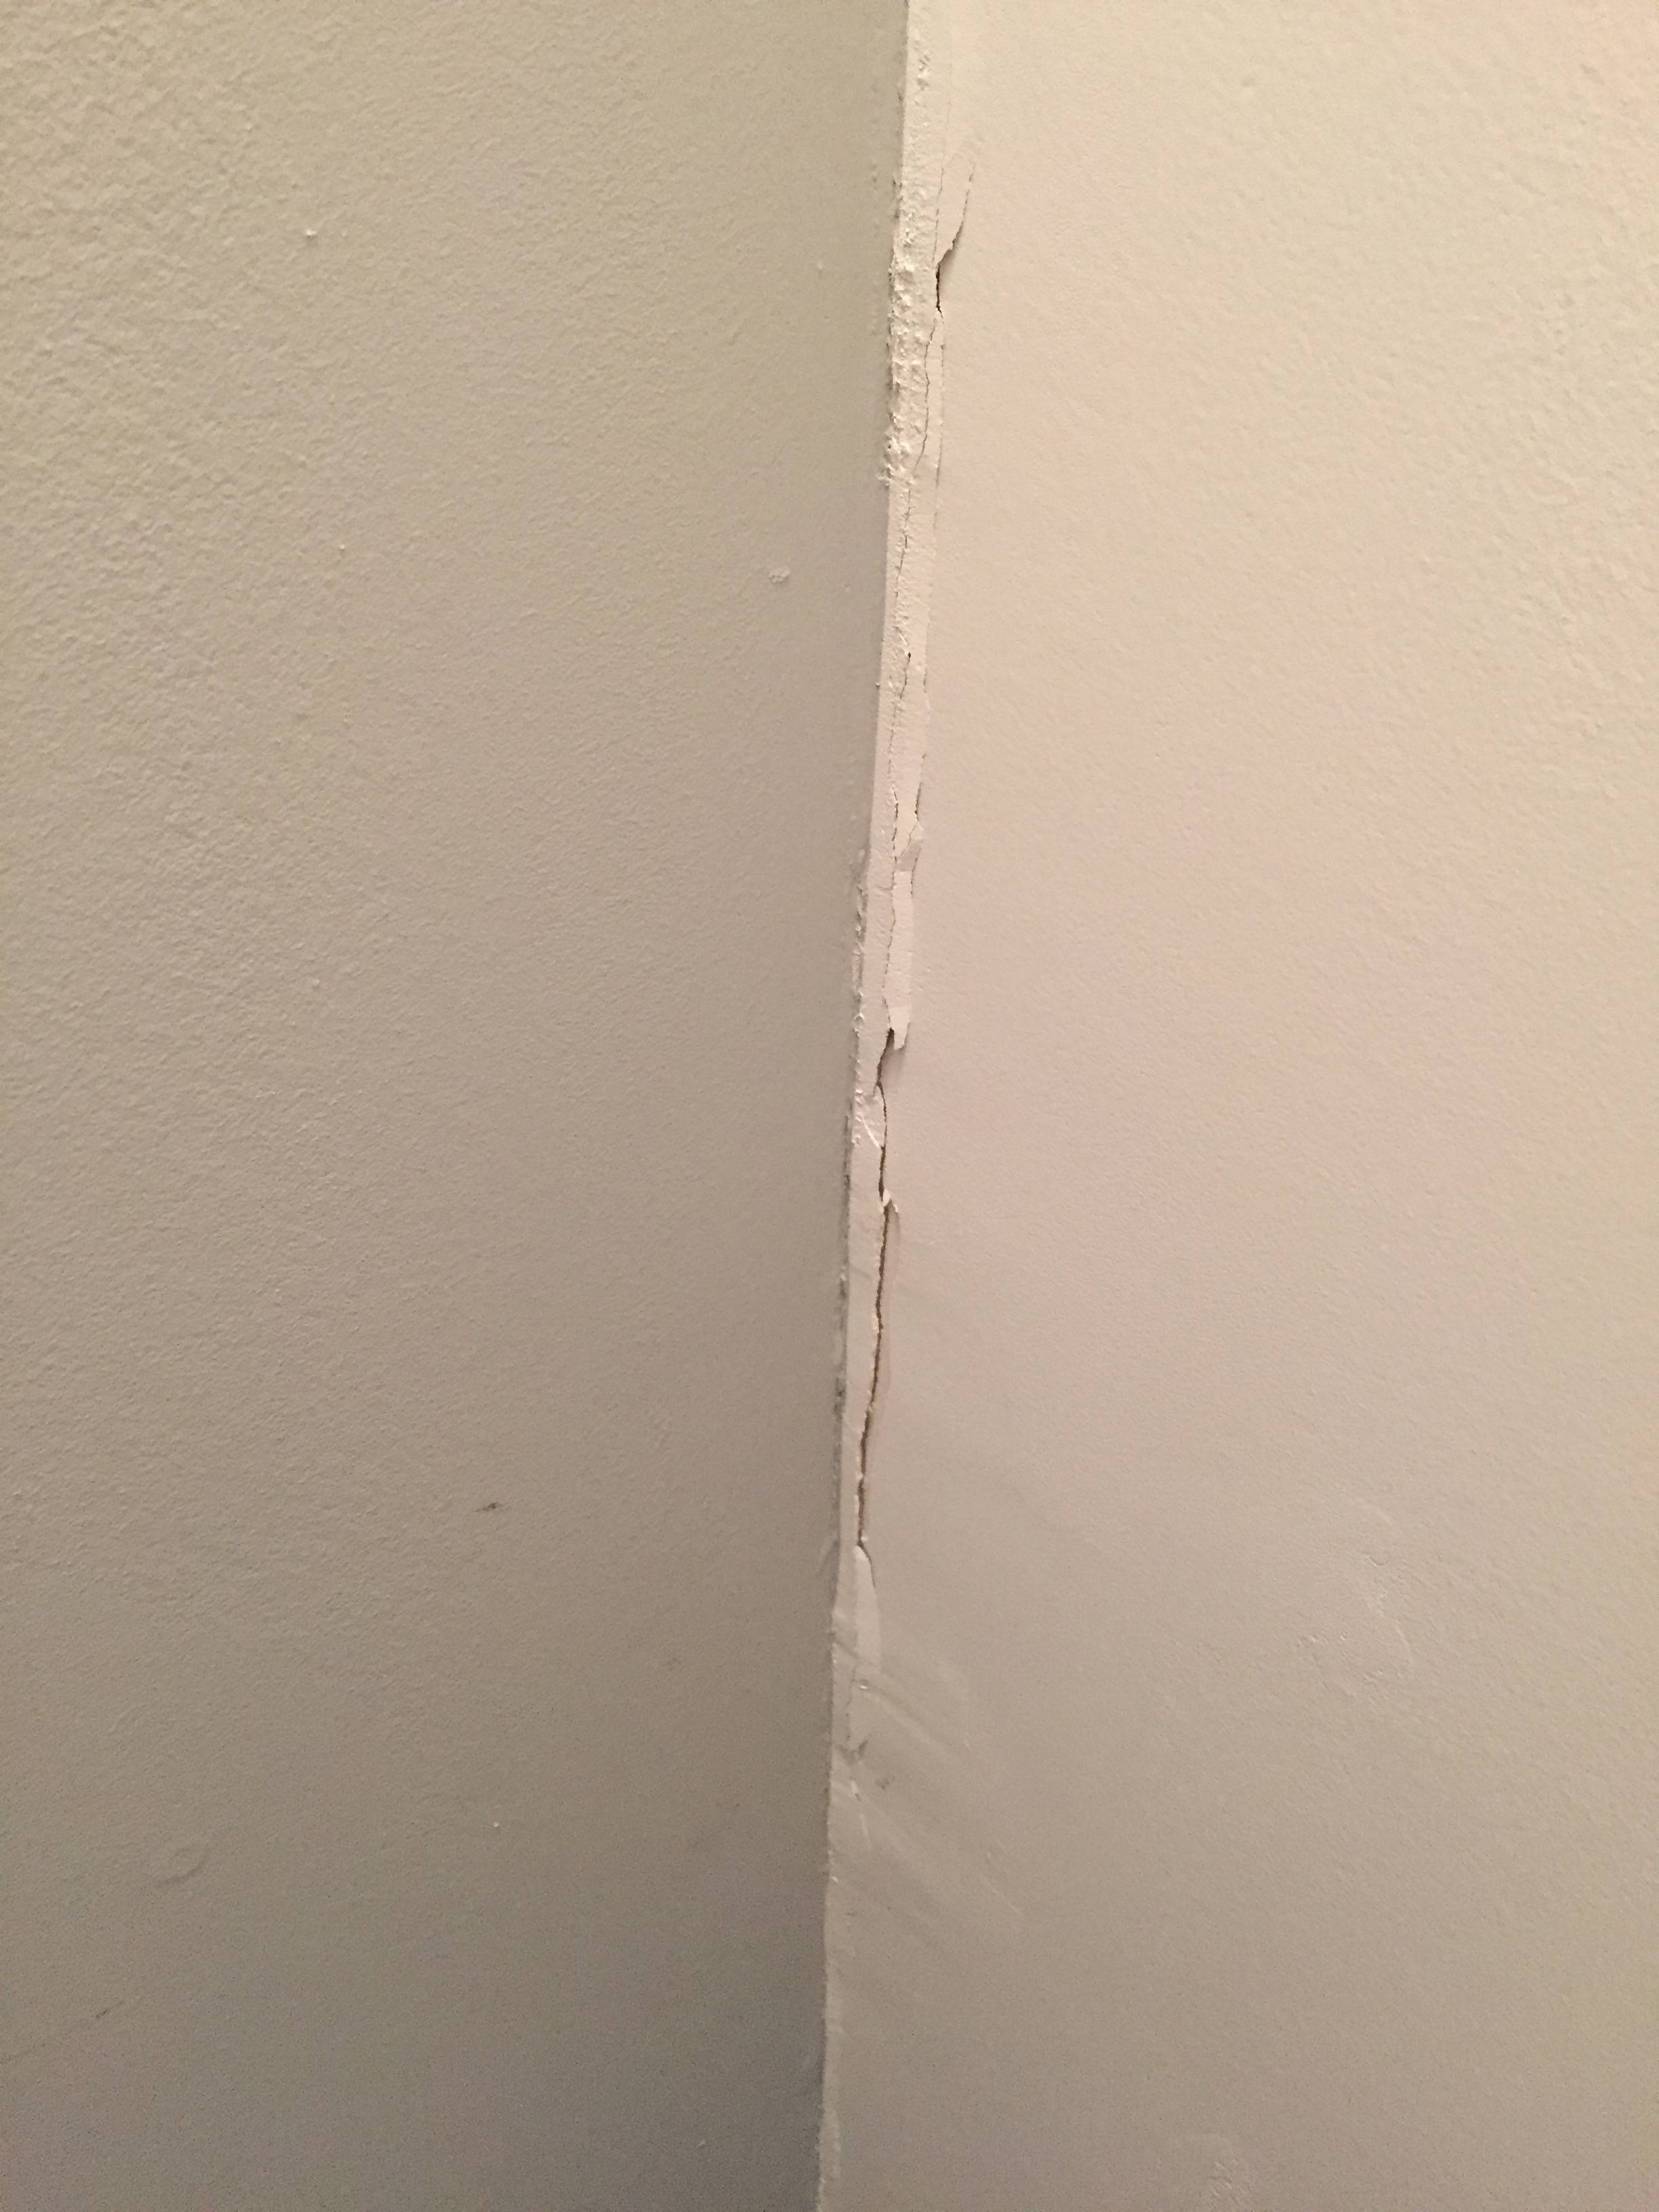 Flipped Home - Cracks Appearing on Wall Corners - Cause for Concern ...